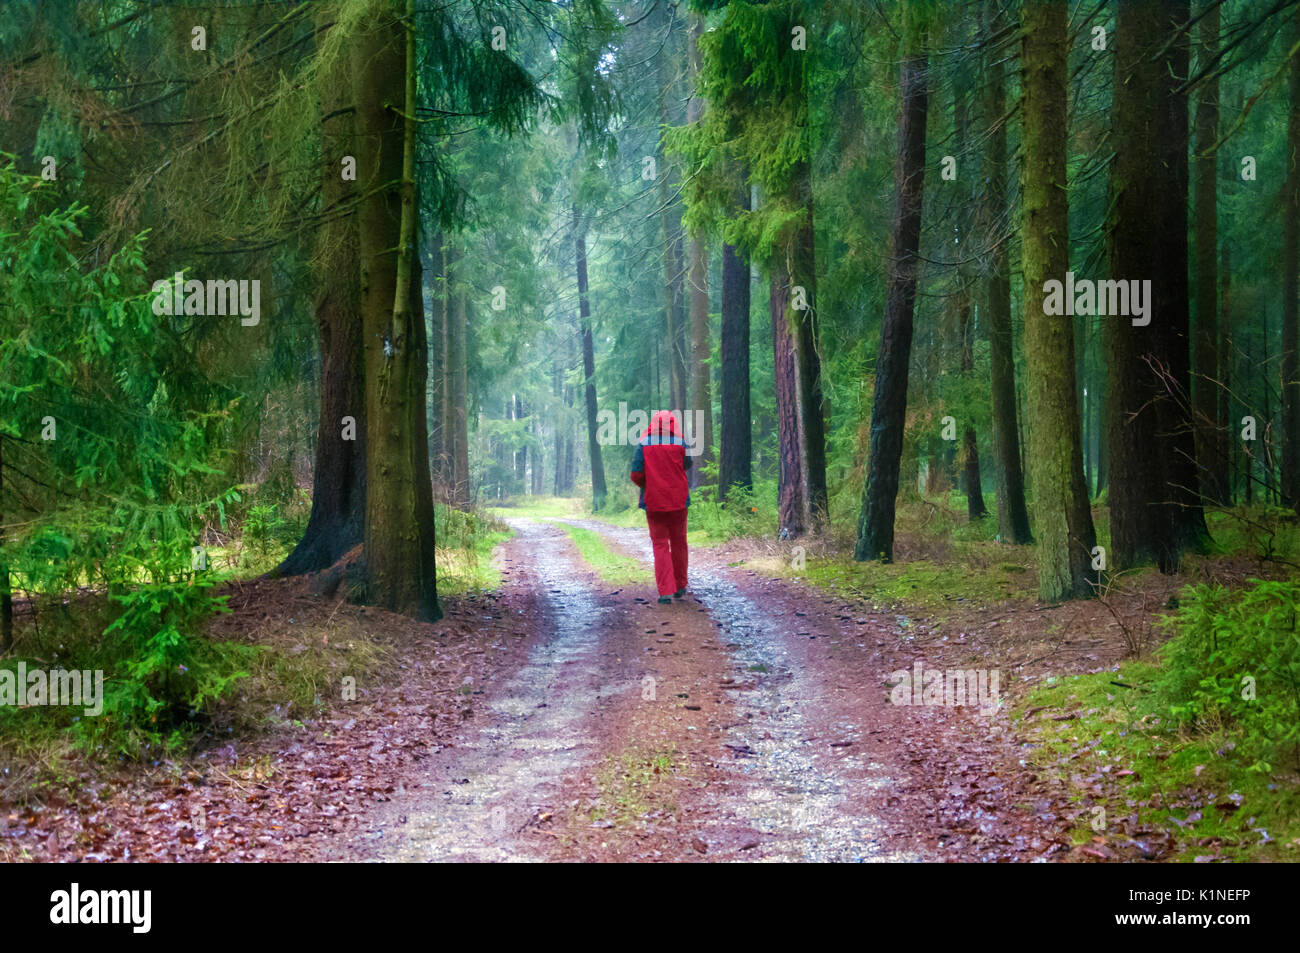 OBERPFALZ, GERMANY - Dec. 16, 2015: A hiker follows a forest path in Doost Nature preserve. Stock Photo